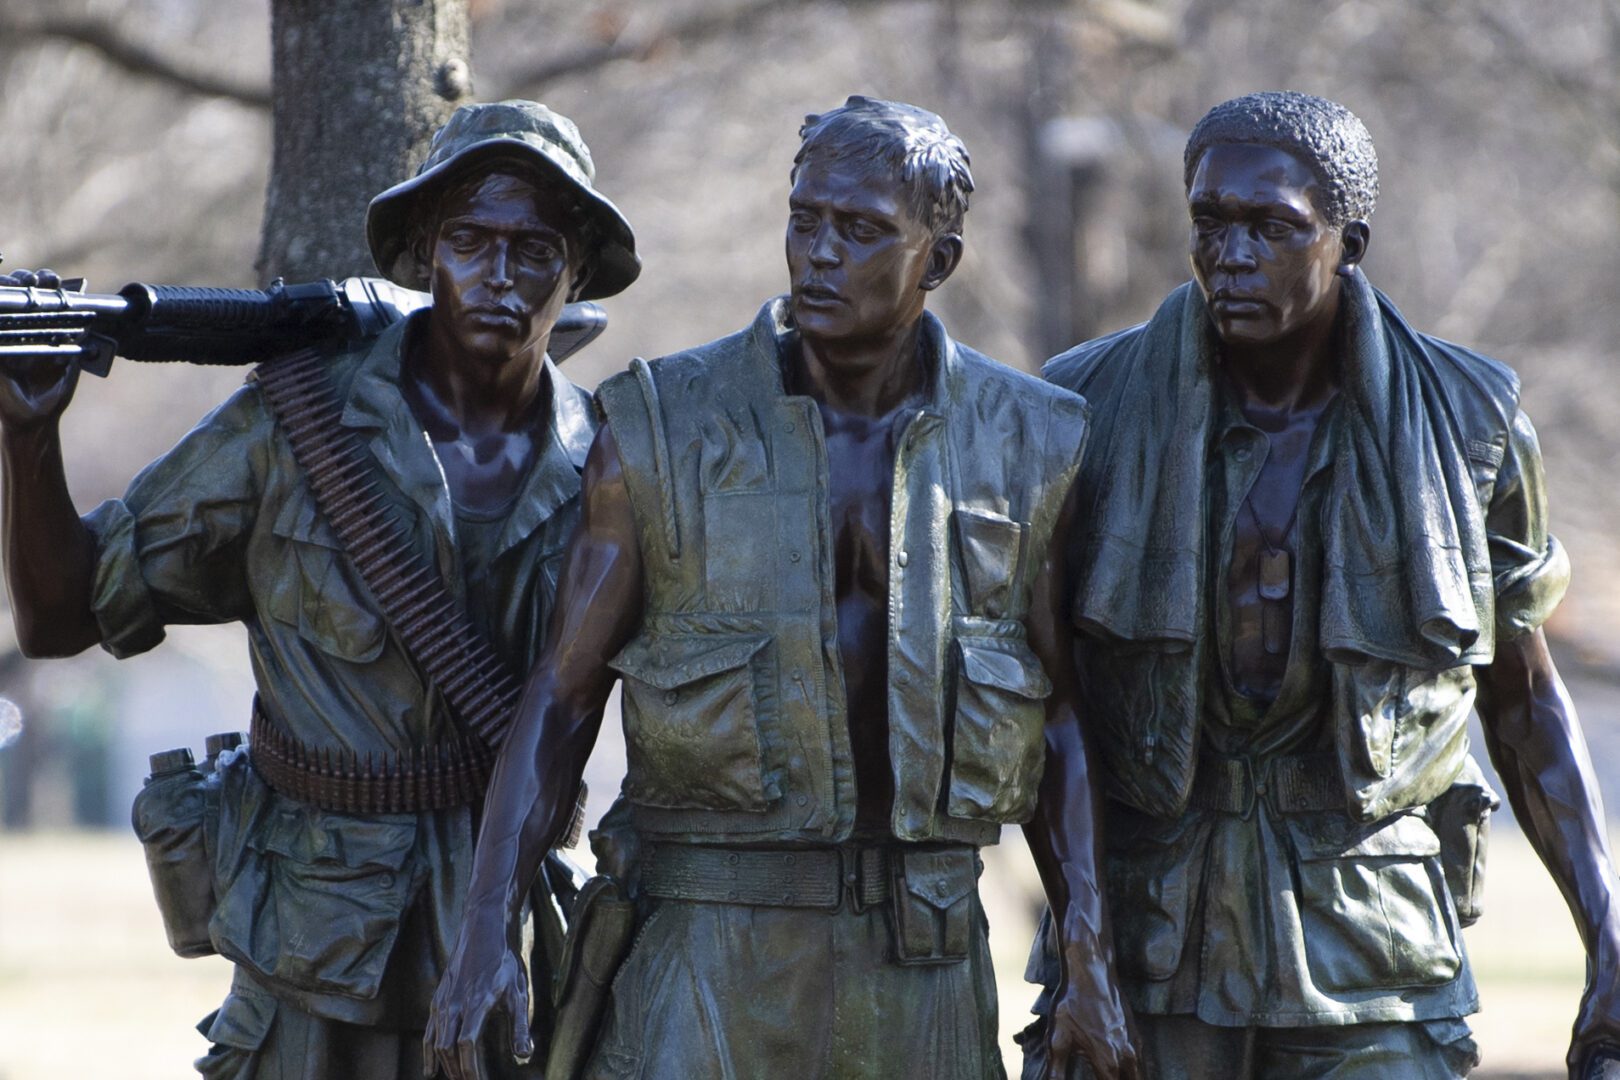 Three Soldiers statue located at the Viet Nam Memorial in Washington D.C.